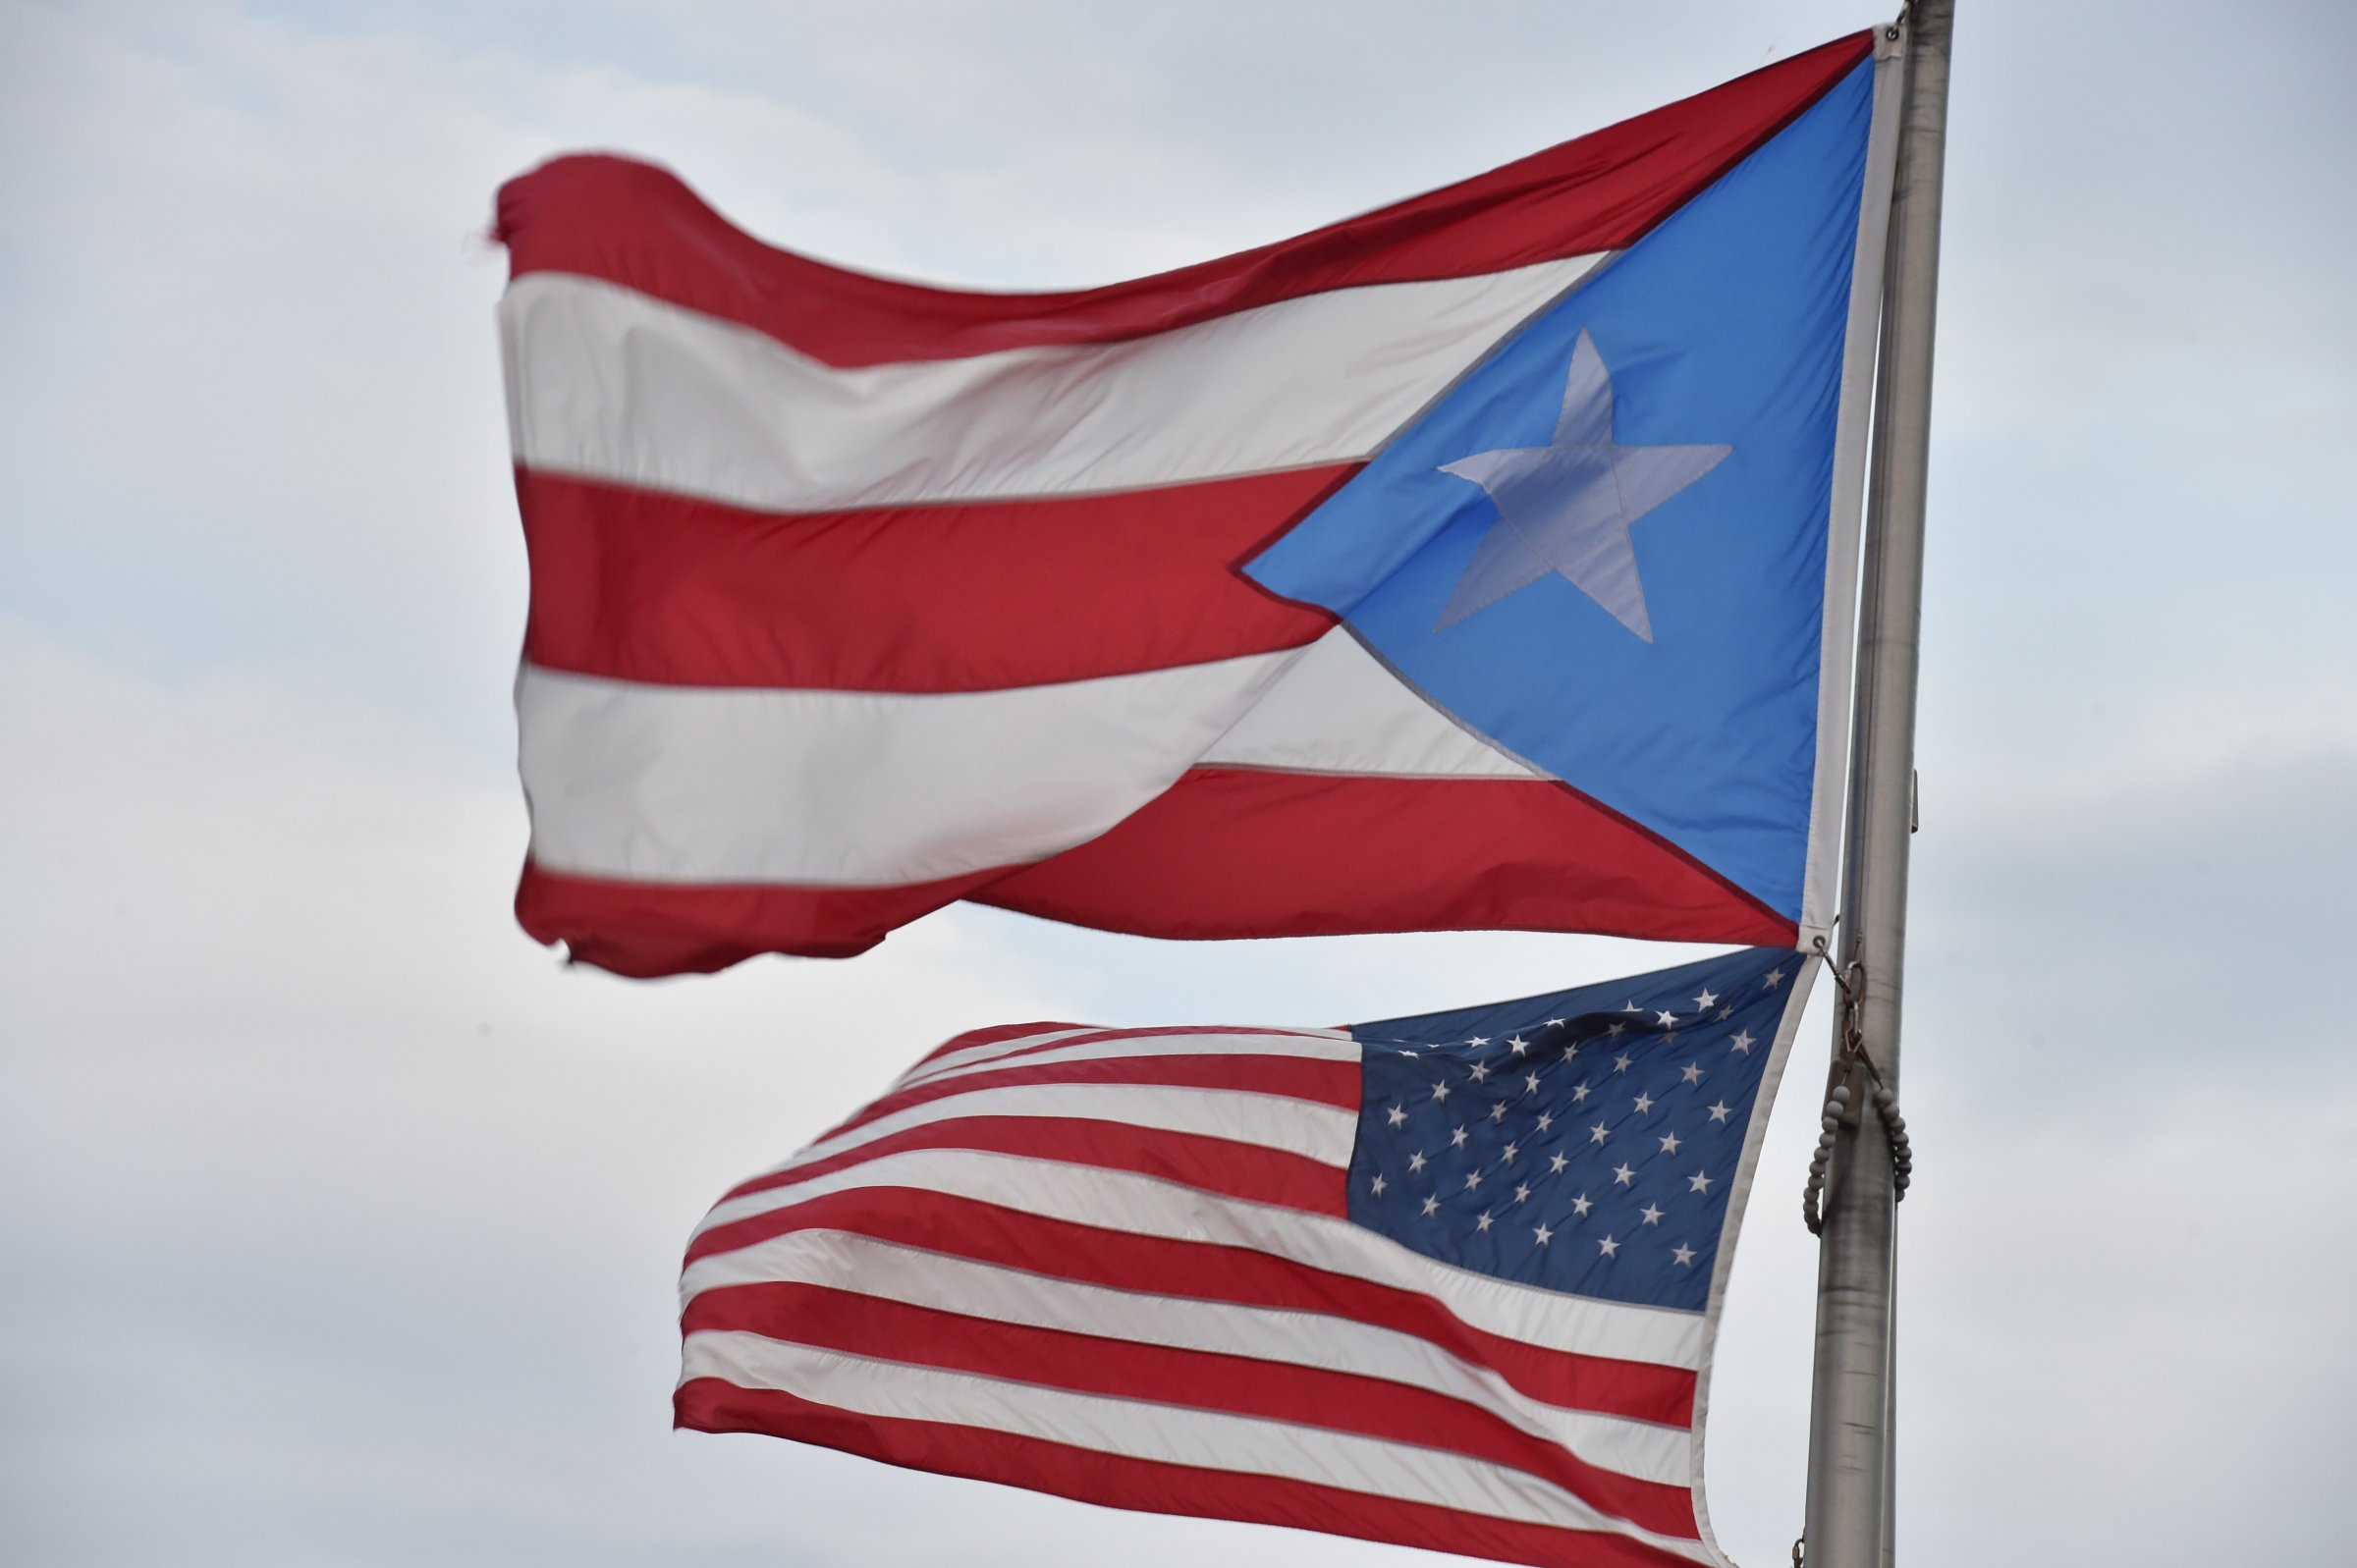 The Puerto Rican and US flags are seen in the Old Town district Feb. 9, 2015 in San Juan, Puerto Rico.